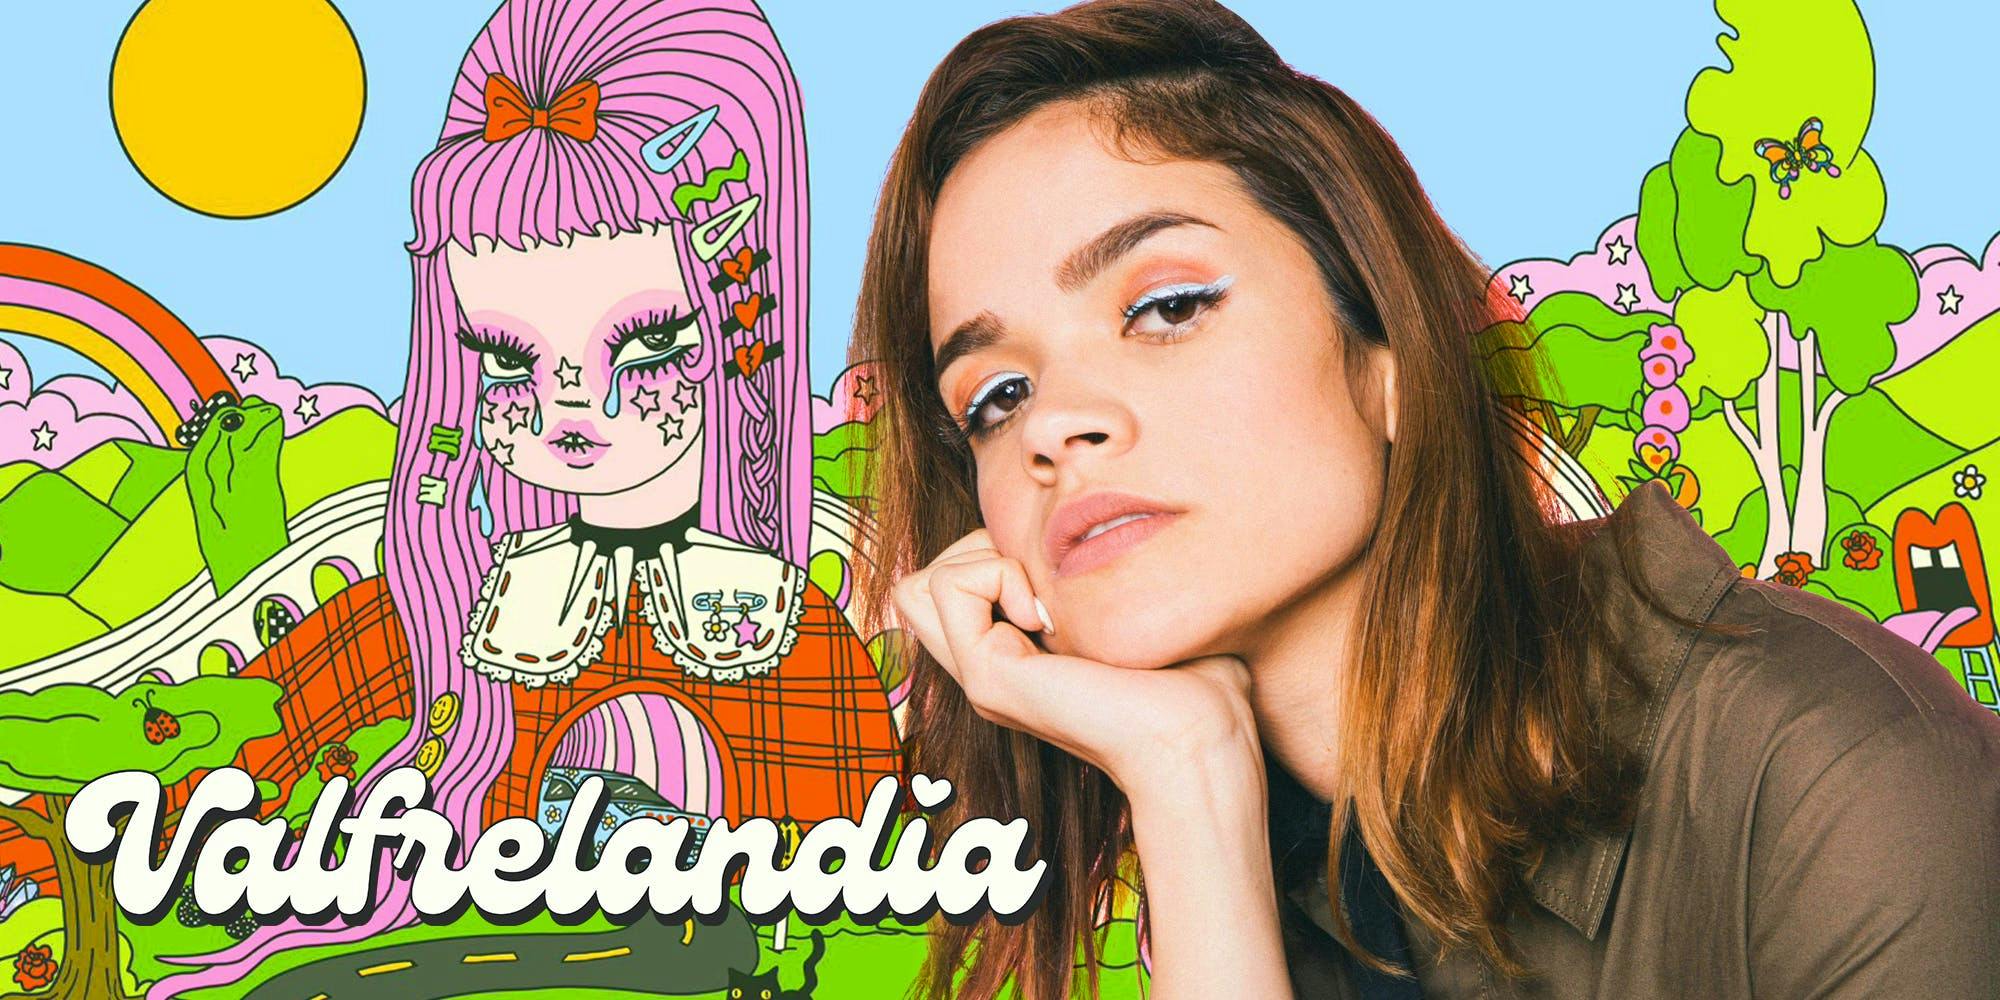 From Tumblr to Her NFT Project Valfrélandia, Cult-Favorite Artist Ilse Valfré Shares How She Evolved Her Online Brand